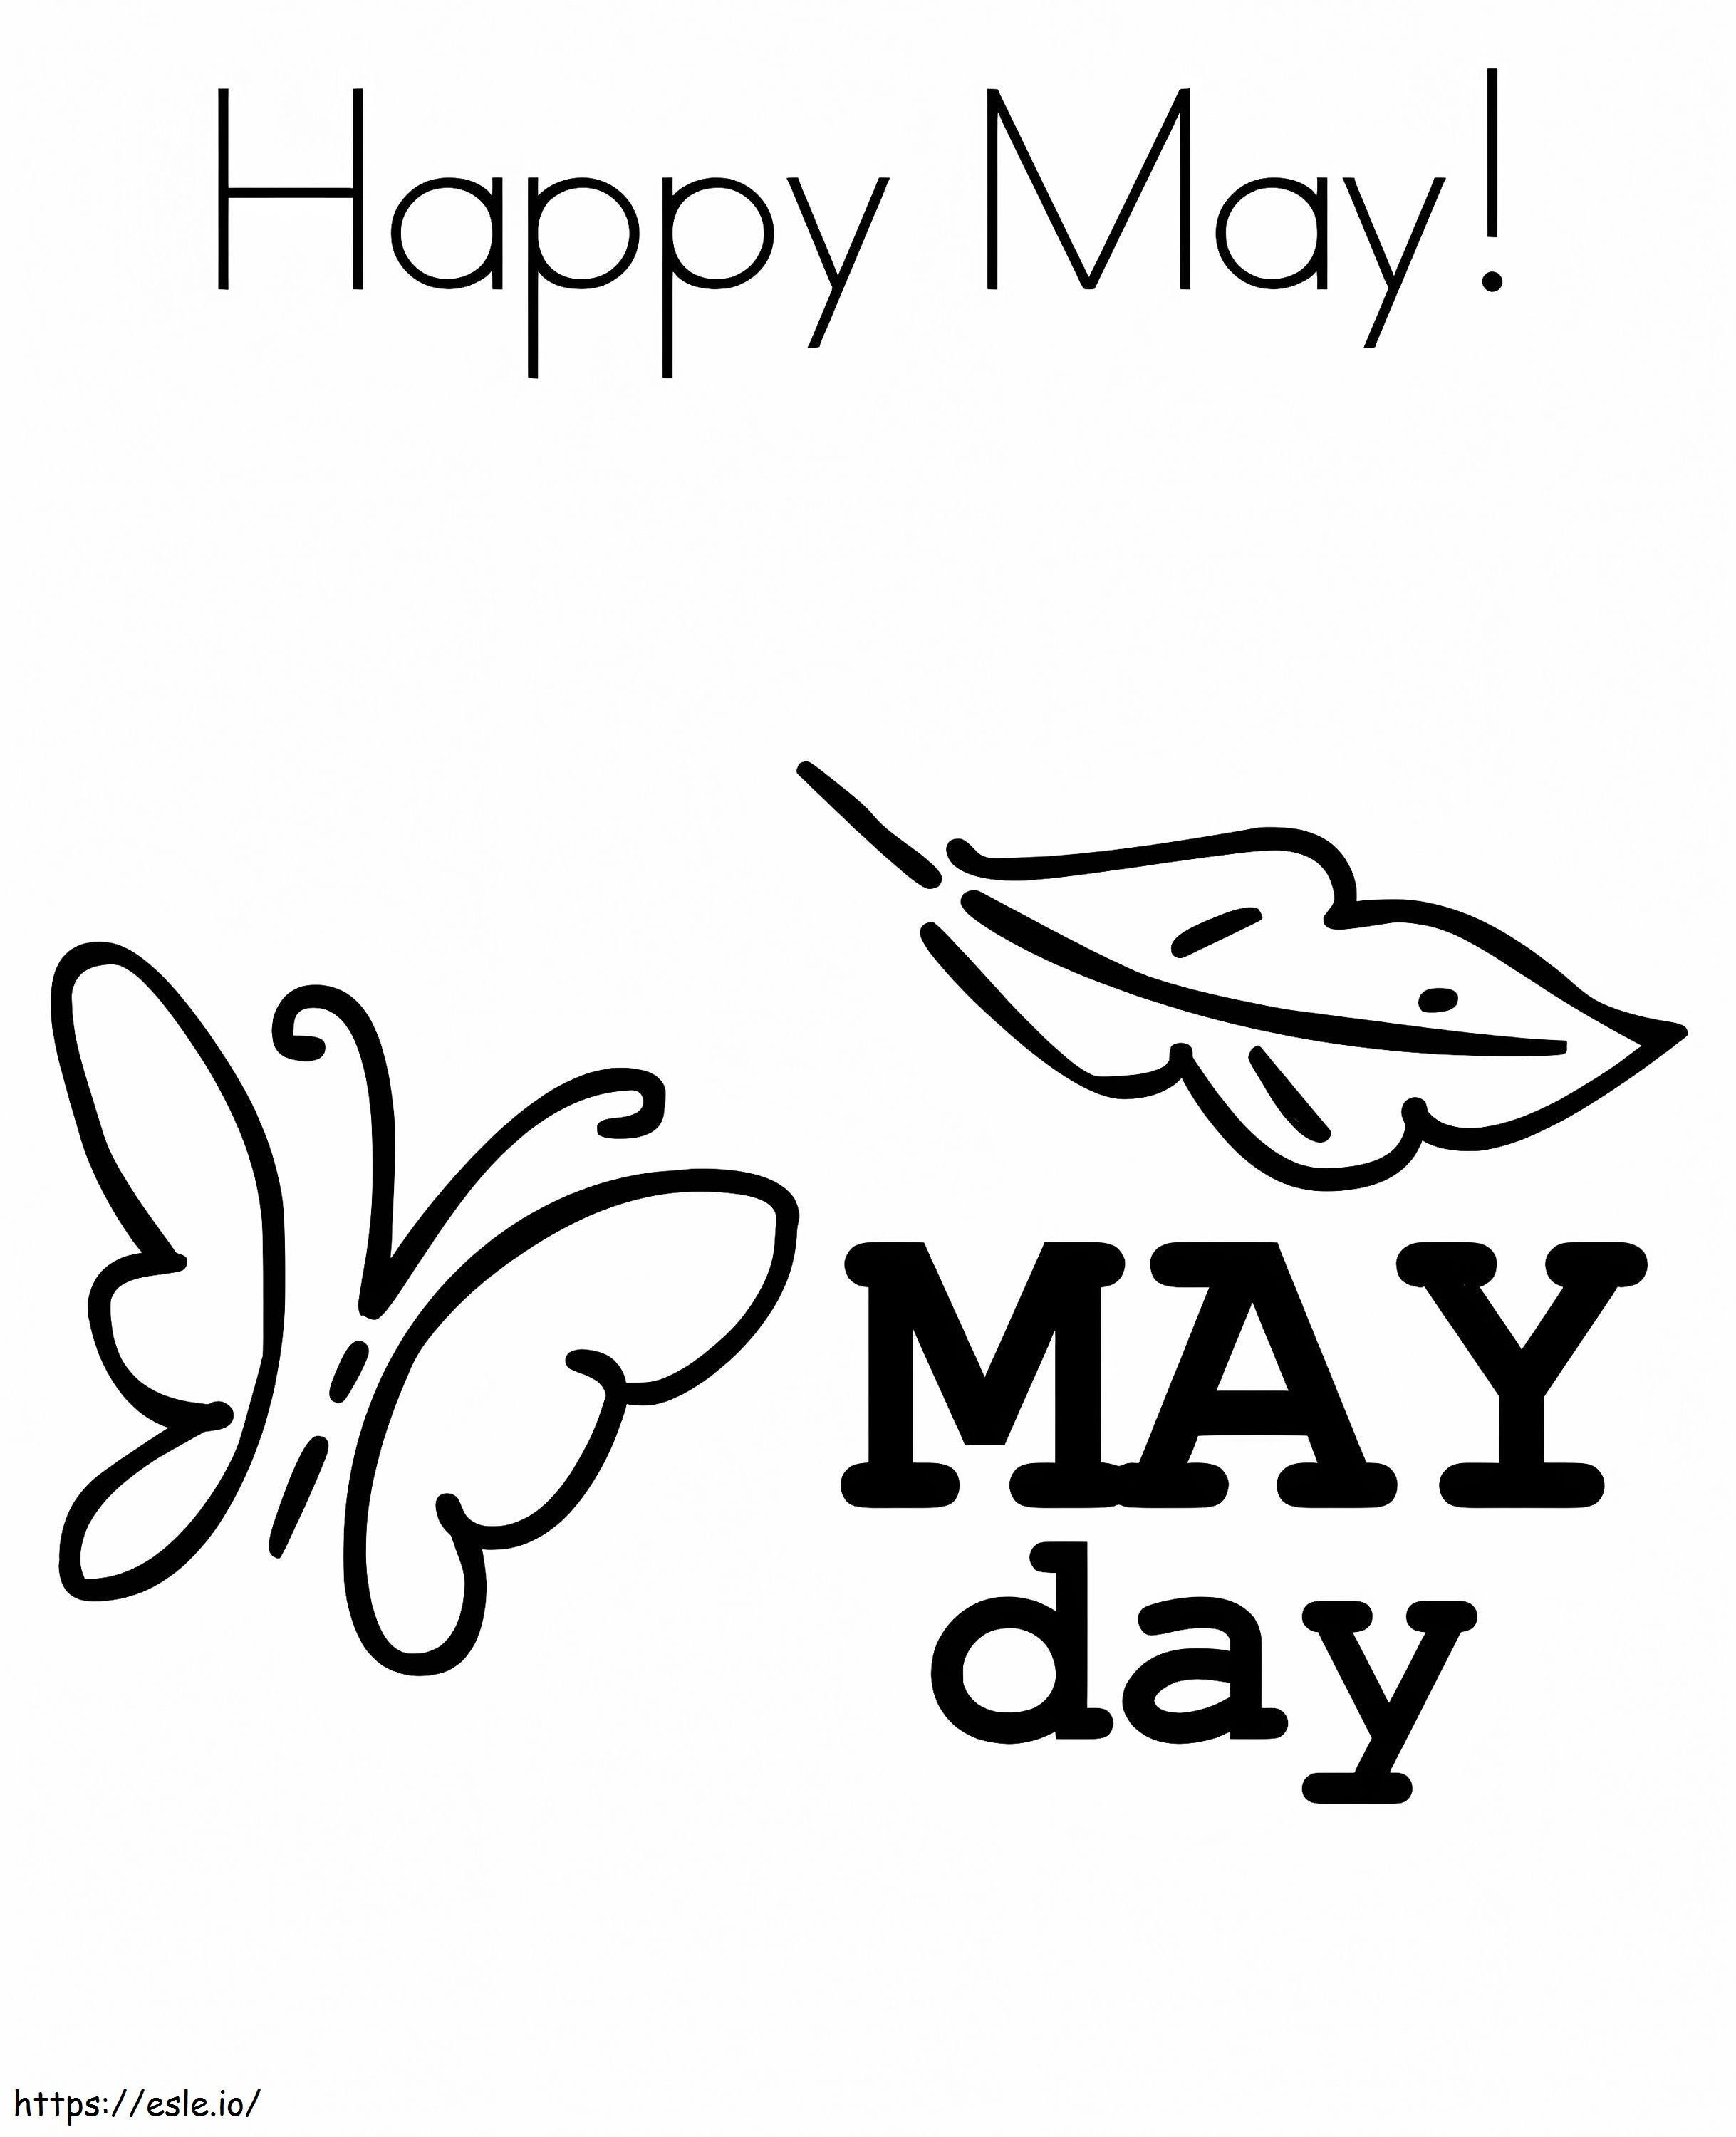 Easy May Day coloring page